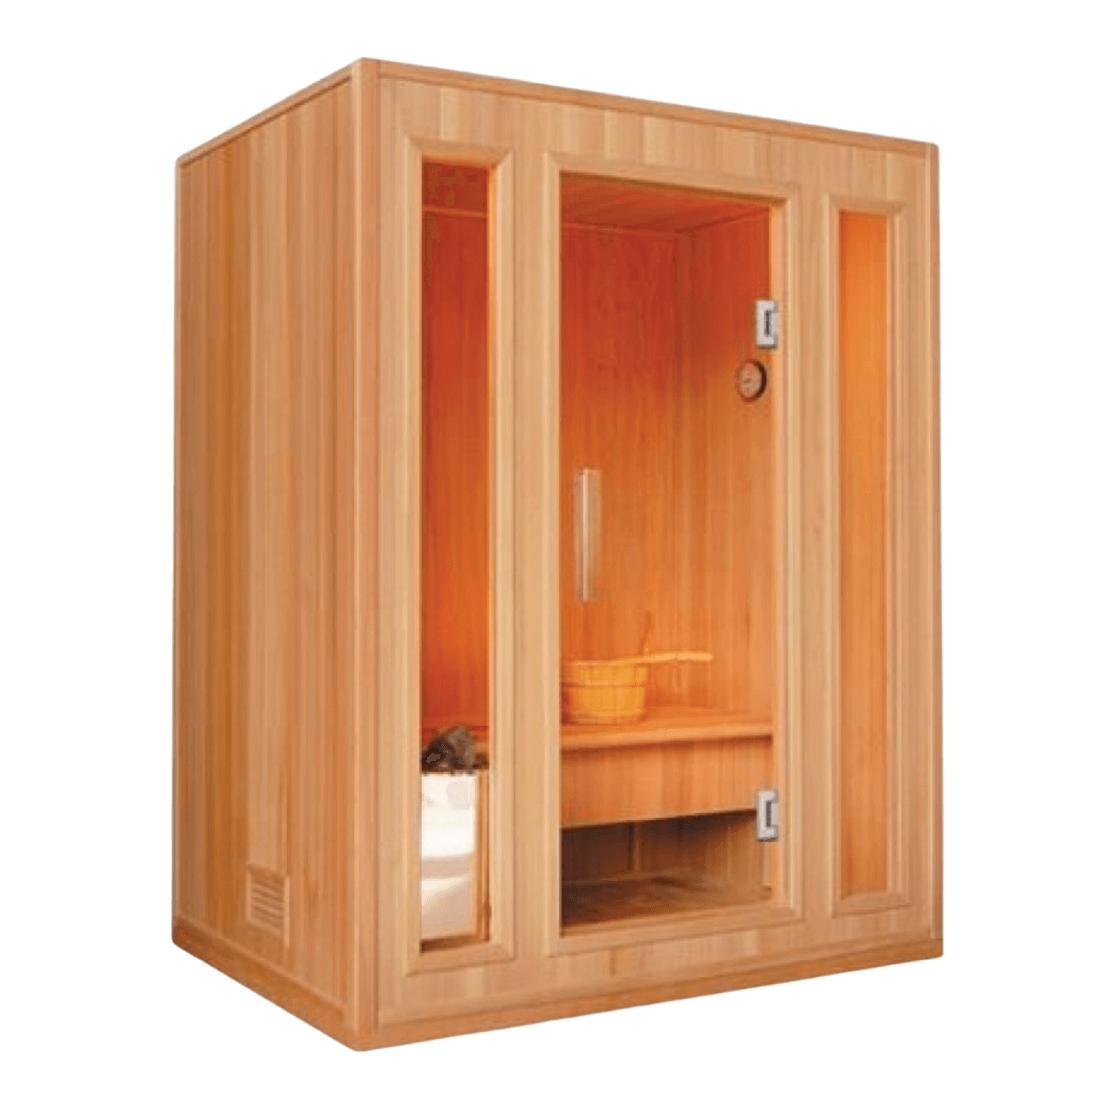 SunRay Southport HL300SN Three Person Traditional Sauna